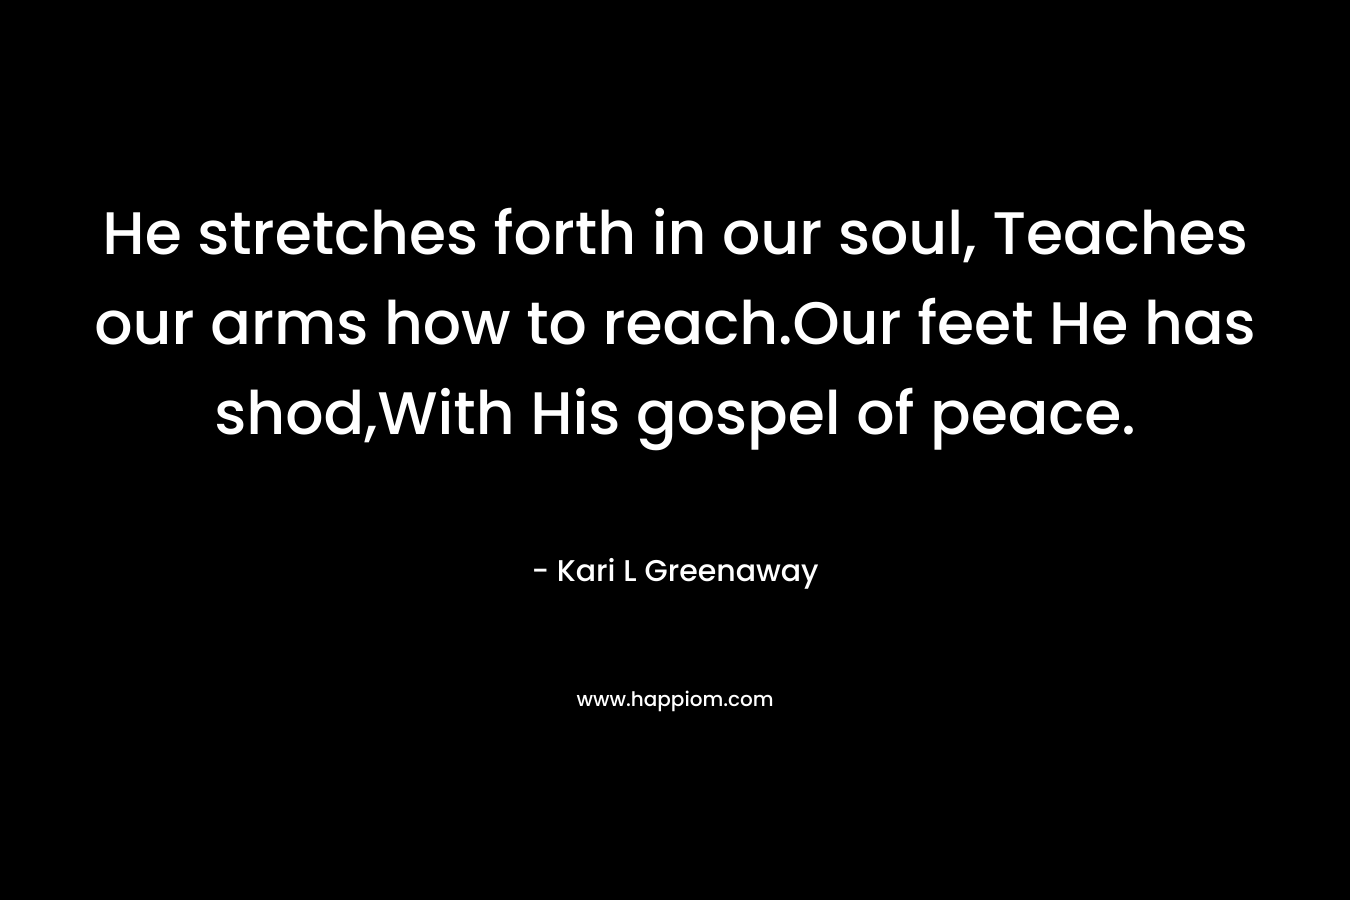 He stretches forth in our soul, Teaches our arms how to reach.Our feet He has shod,With His gospel of peace.